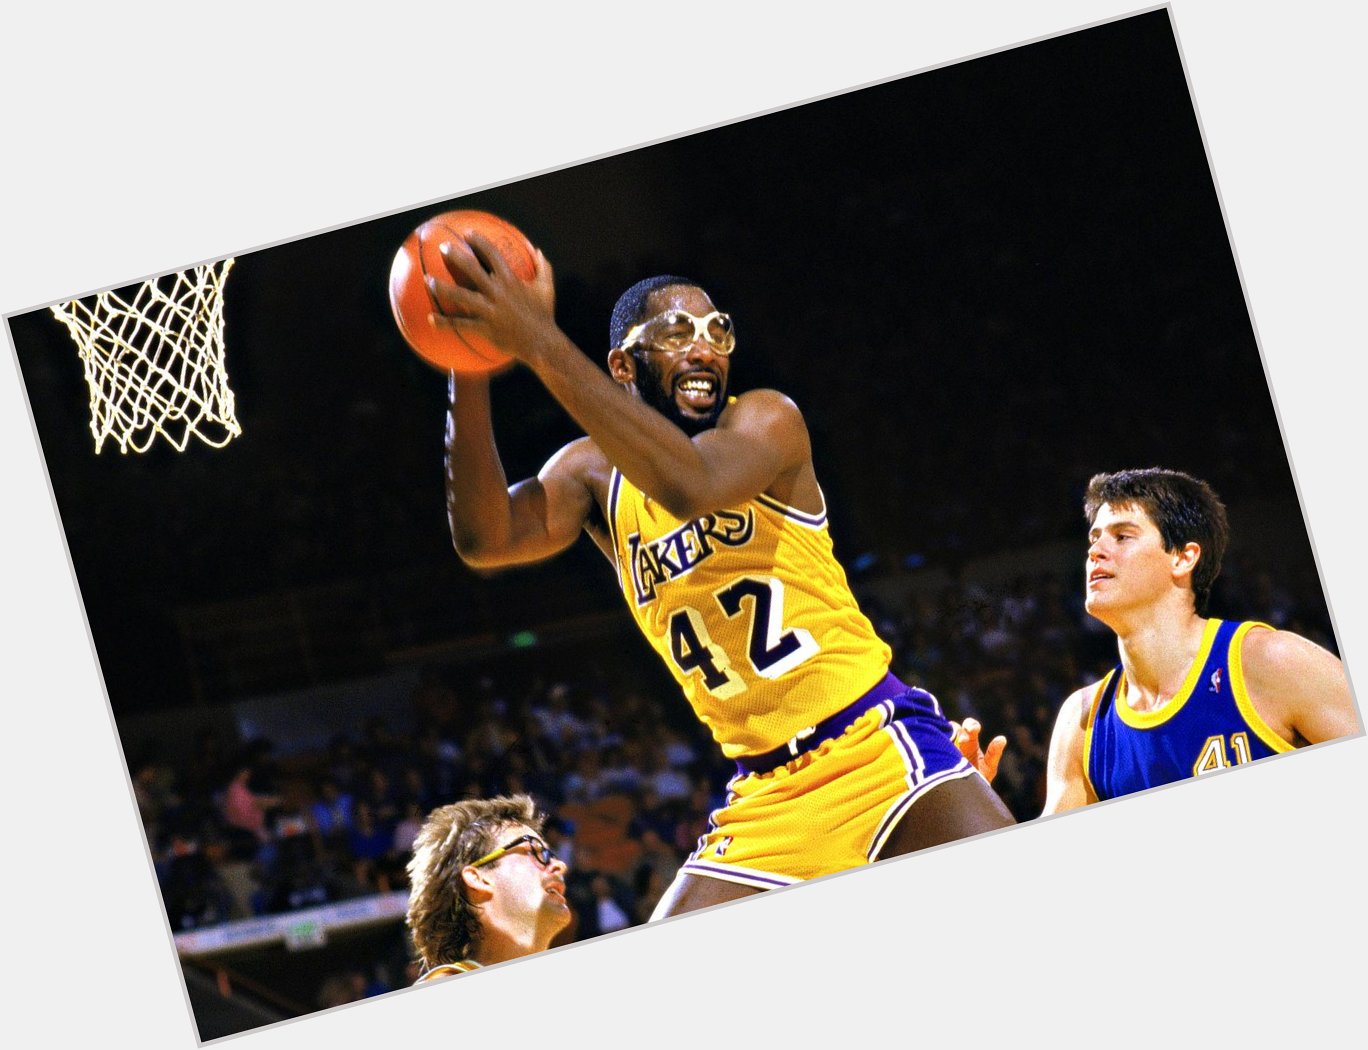 Happy Birthday to James Worthy, who turns 54 today! 